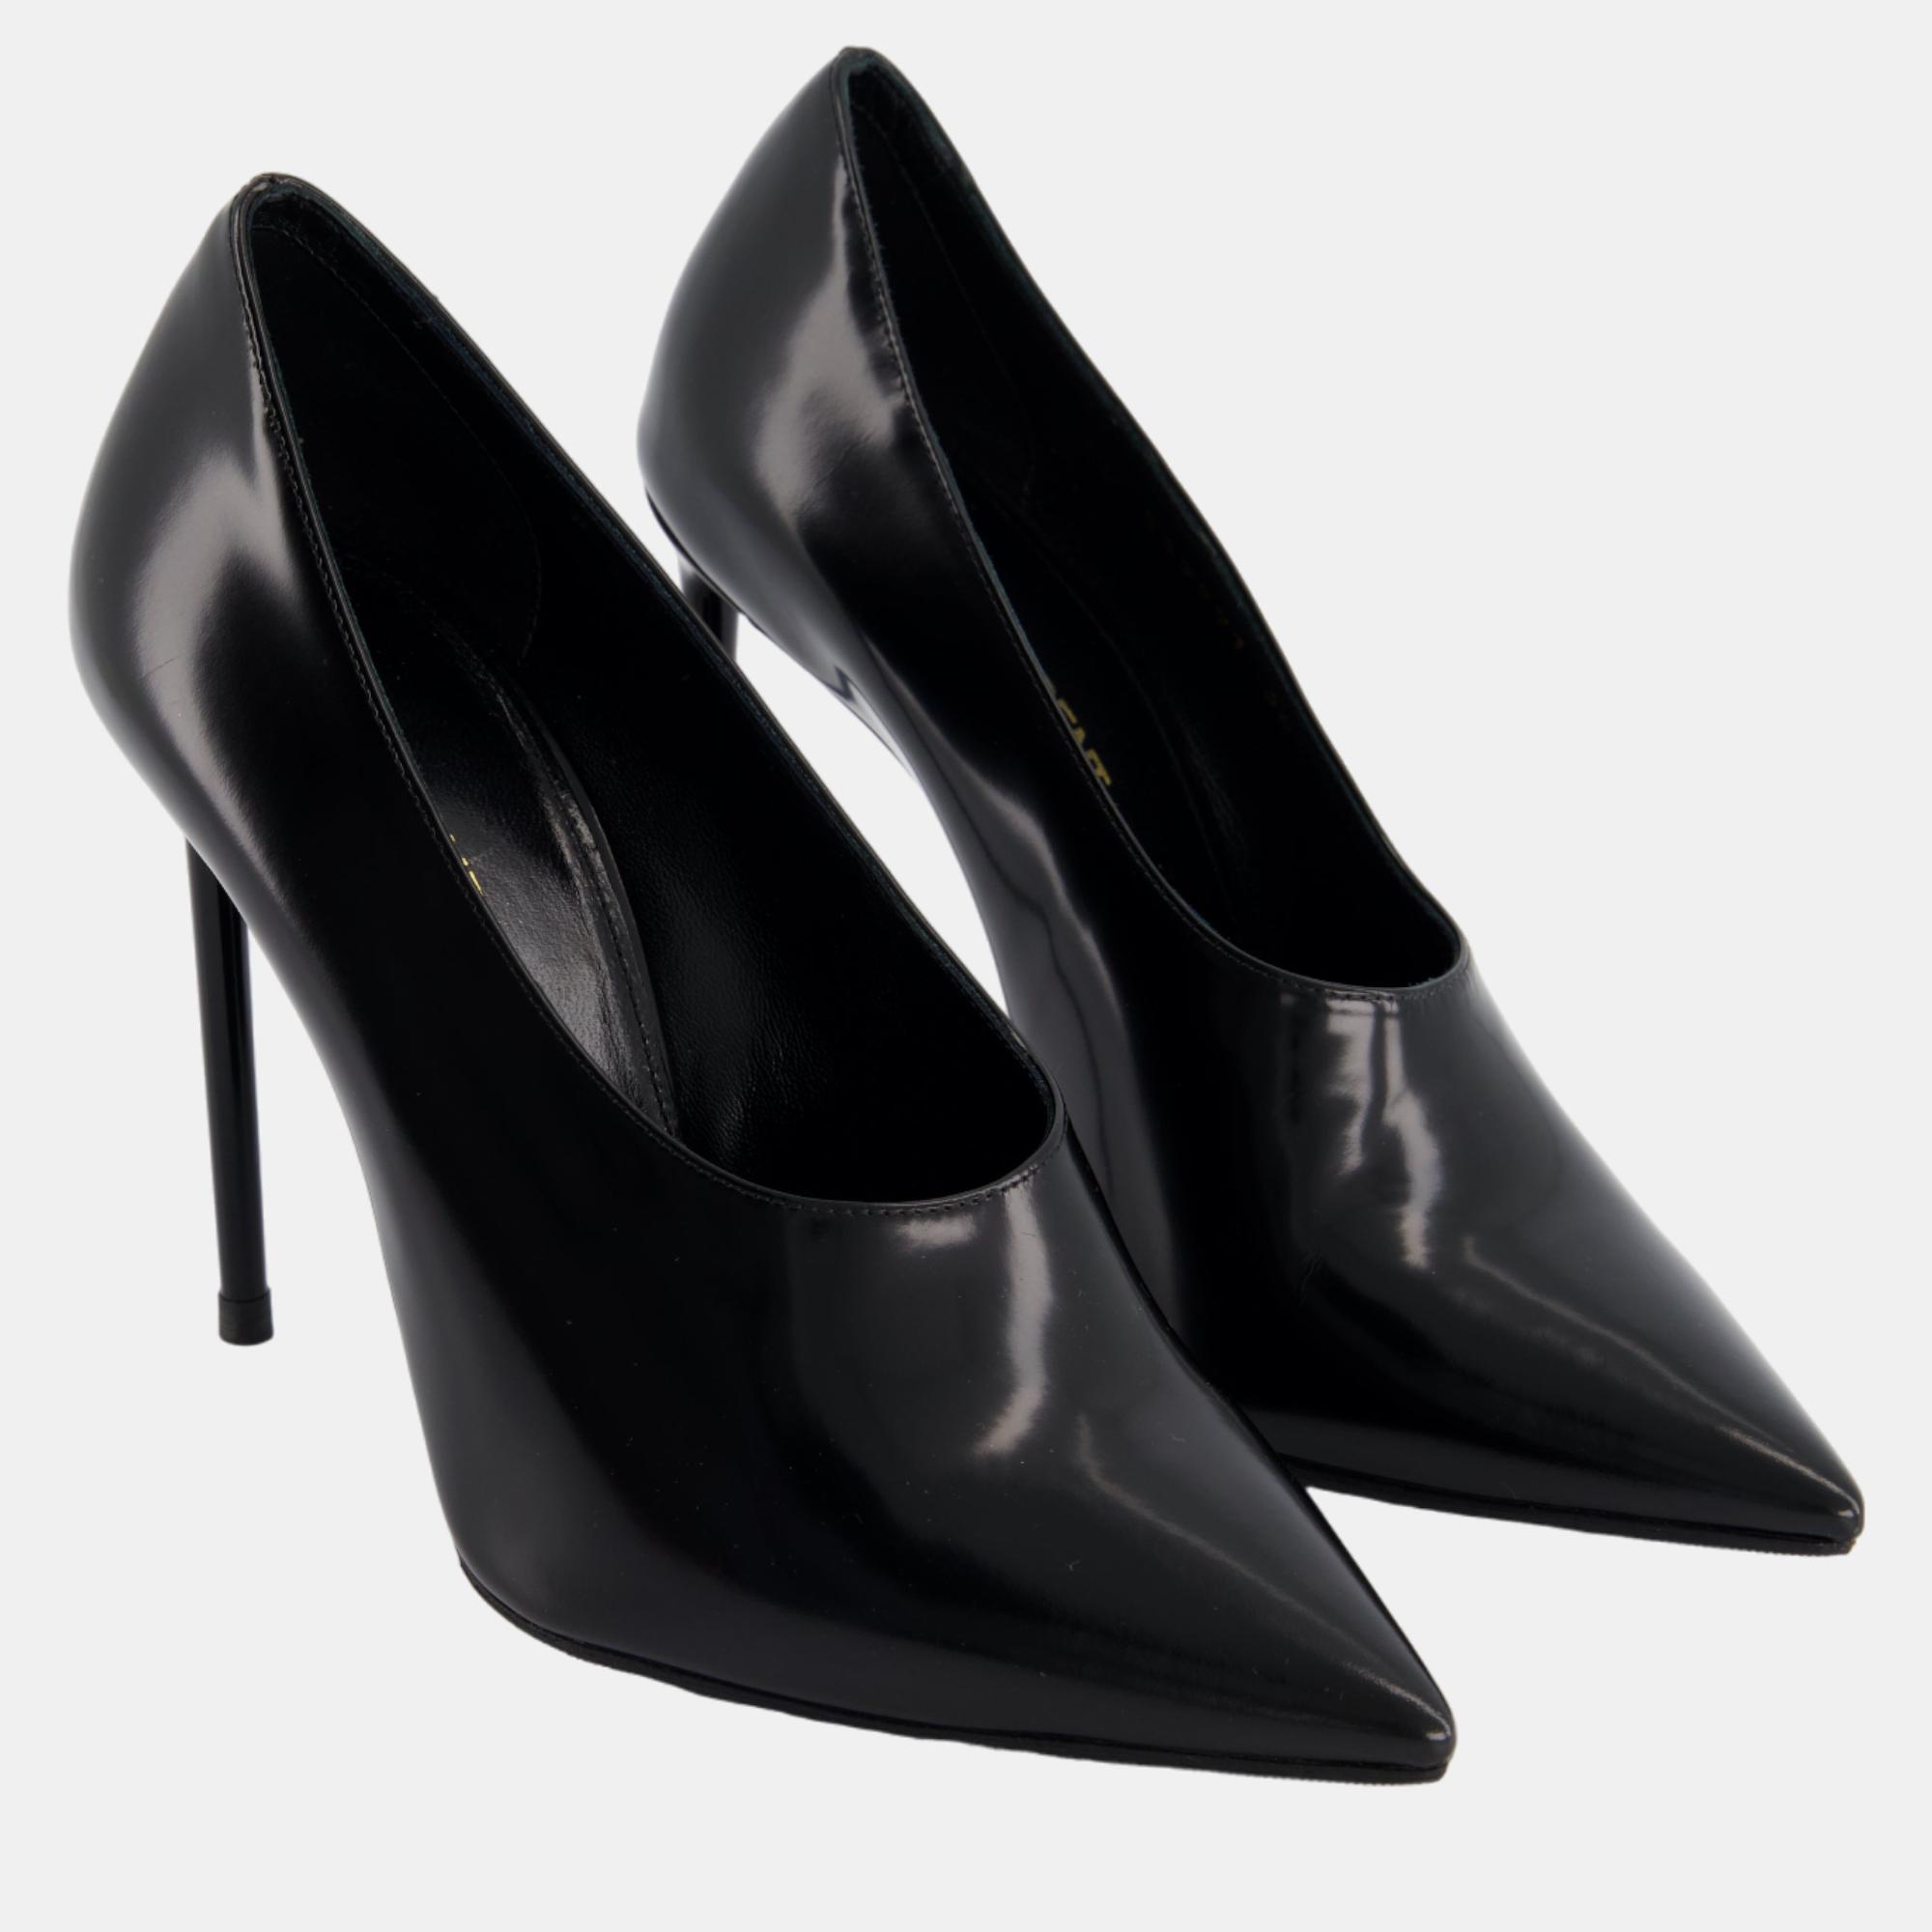 

Saint Laurent Black Patent Leather Heels with Pointed Toe Detail Size EU